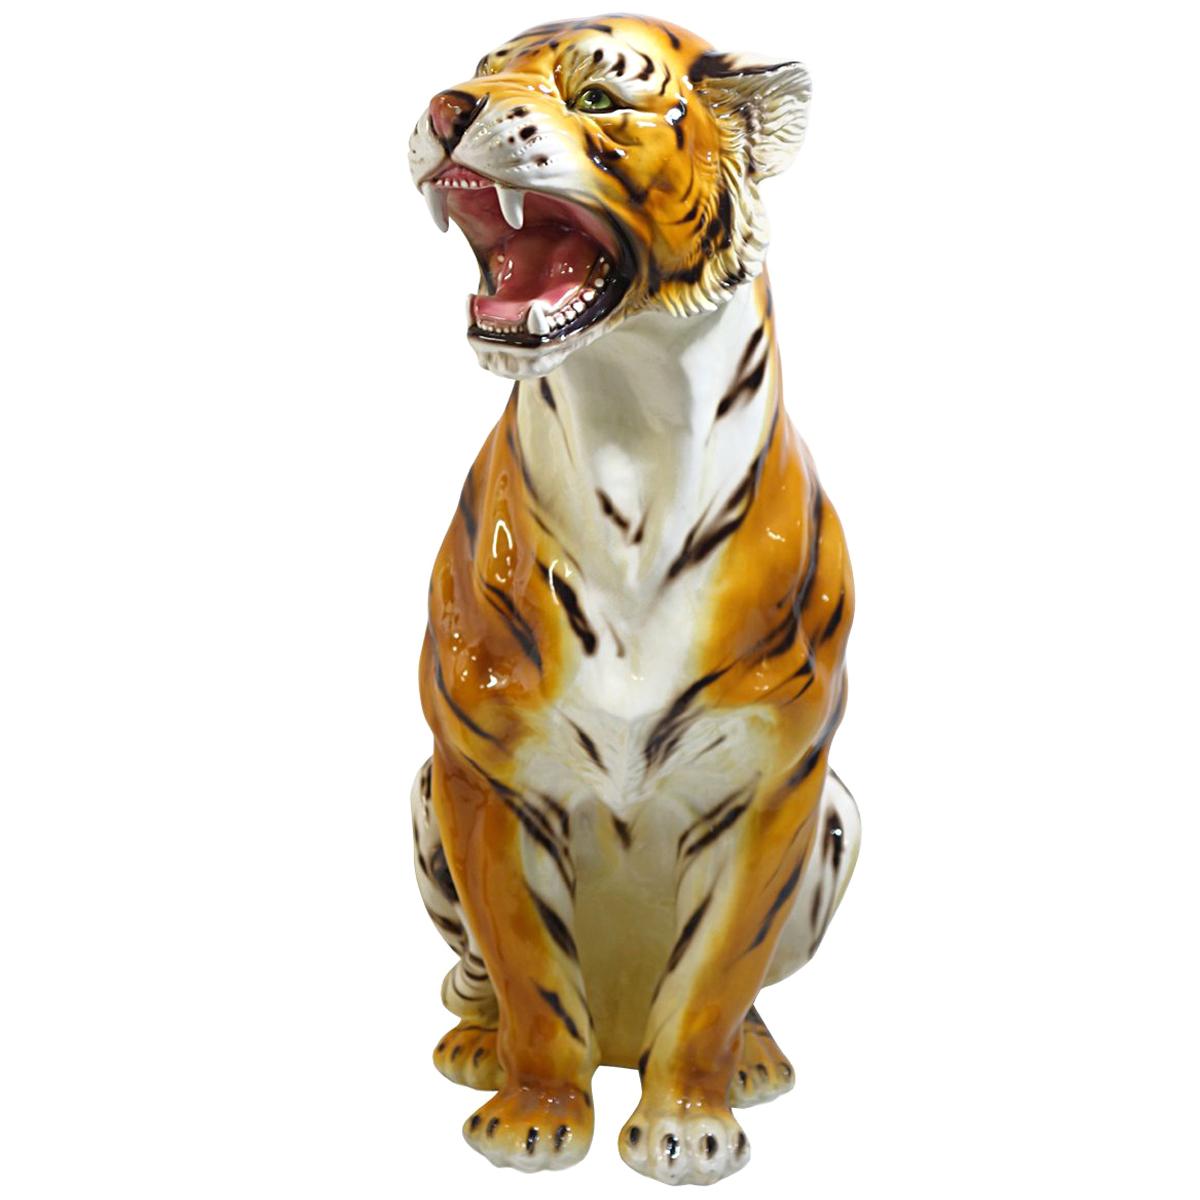 Big Mid-Century Modern Ceramic Tiger in the Style of Ronzan Marked Made in Italy